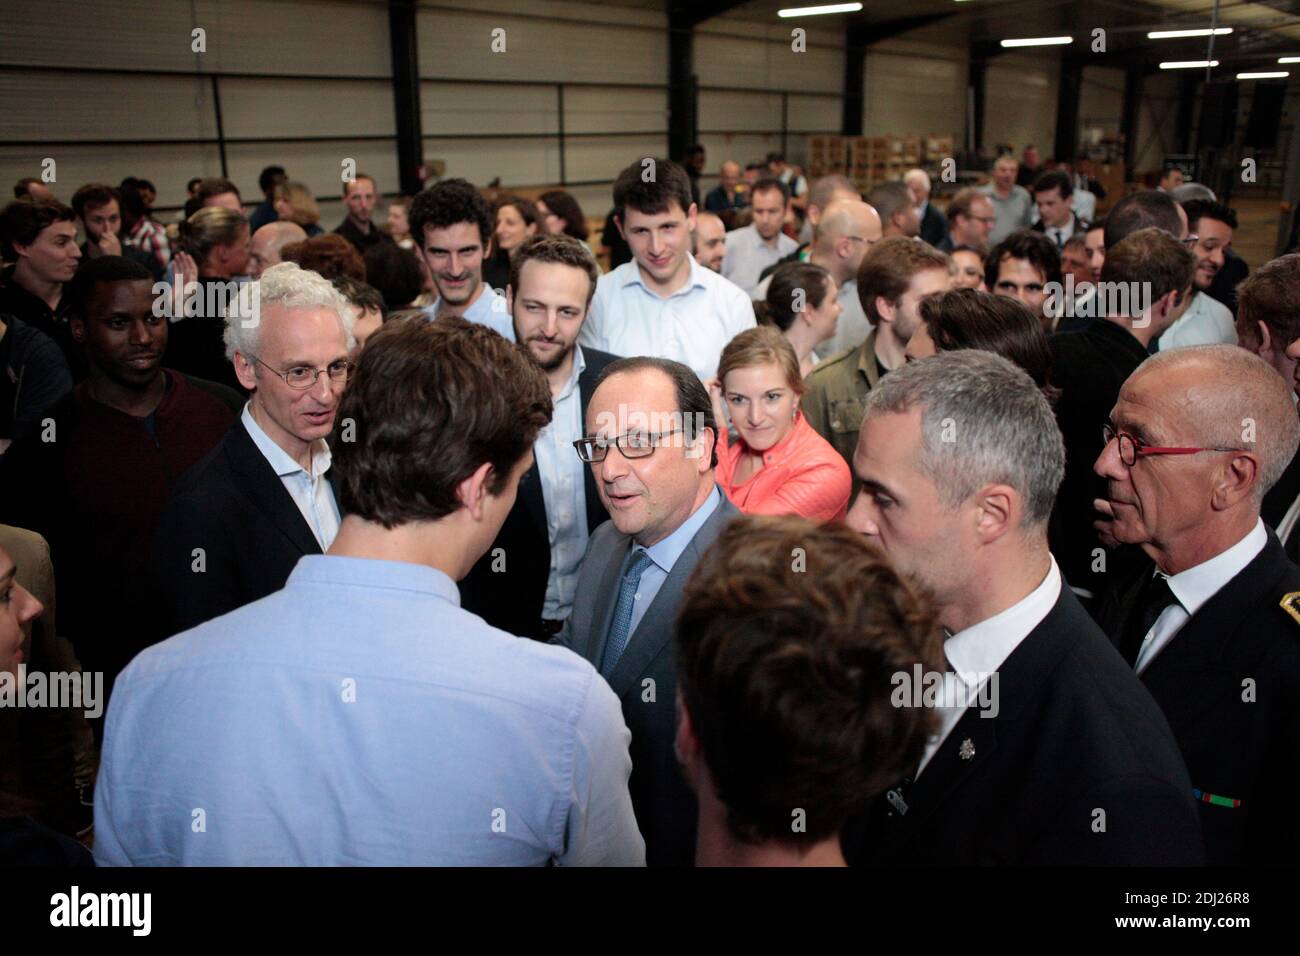 French President Francois Hollande meets with emplyees and poses for selfies as he tours the workshop during a visit to start-up Devialet, an international leader for high-end amplifiers, in Chatelet-en-Brie, near Paris, France on June 21, 2016. Photo by Eliot Blondet/ABACAPRESS.COM Stock Photo